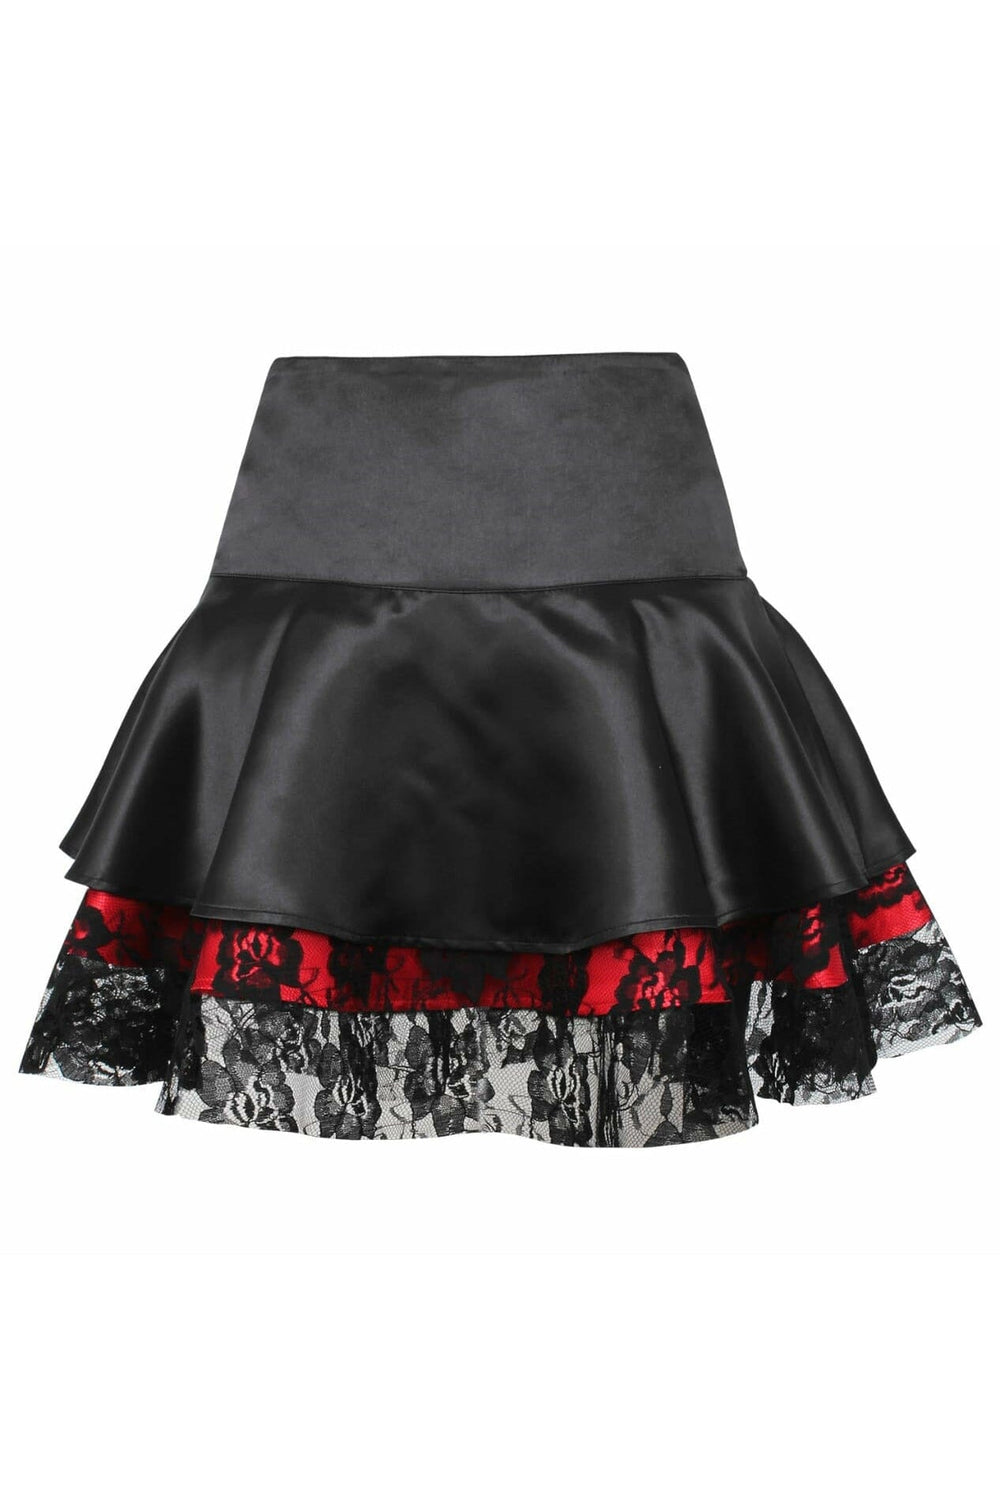 Red w/Black Lace Gothic Skirt-Costume Skirts-Daisy Corsets-SEXYSHOES.COM